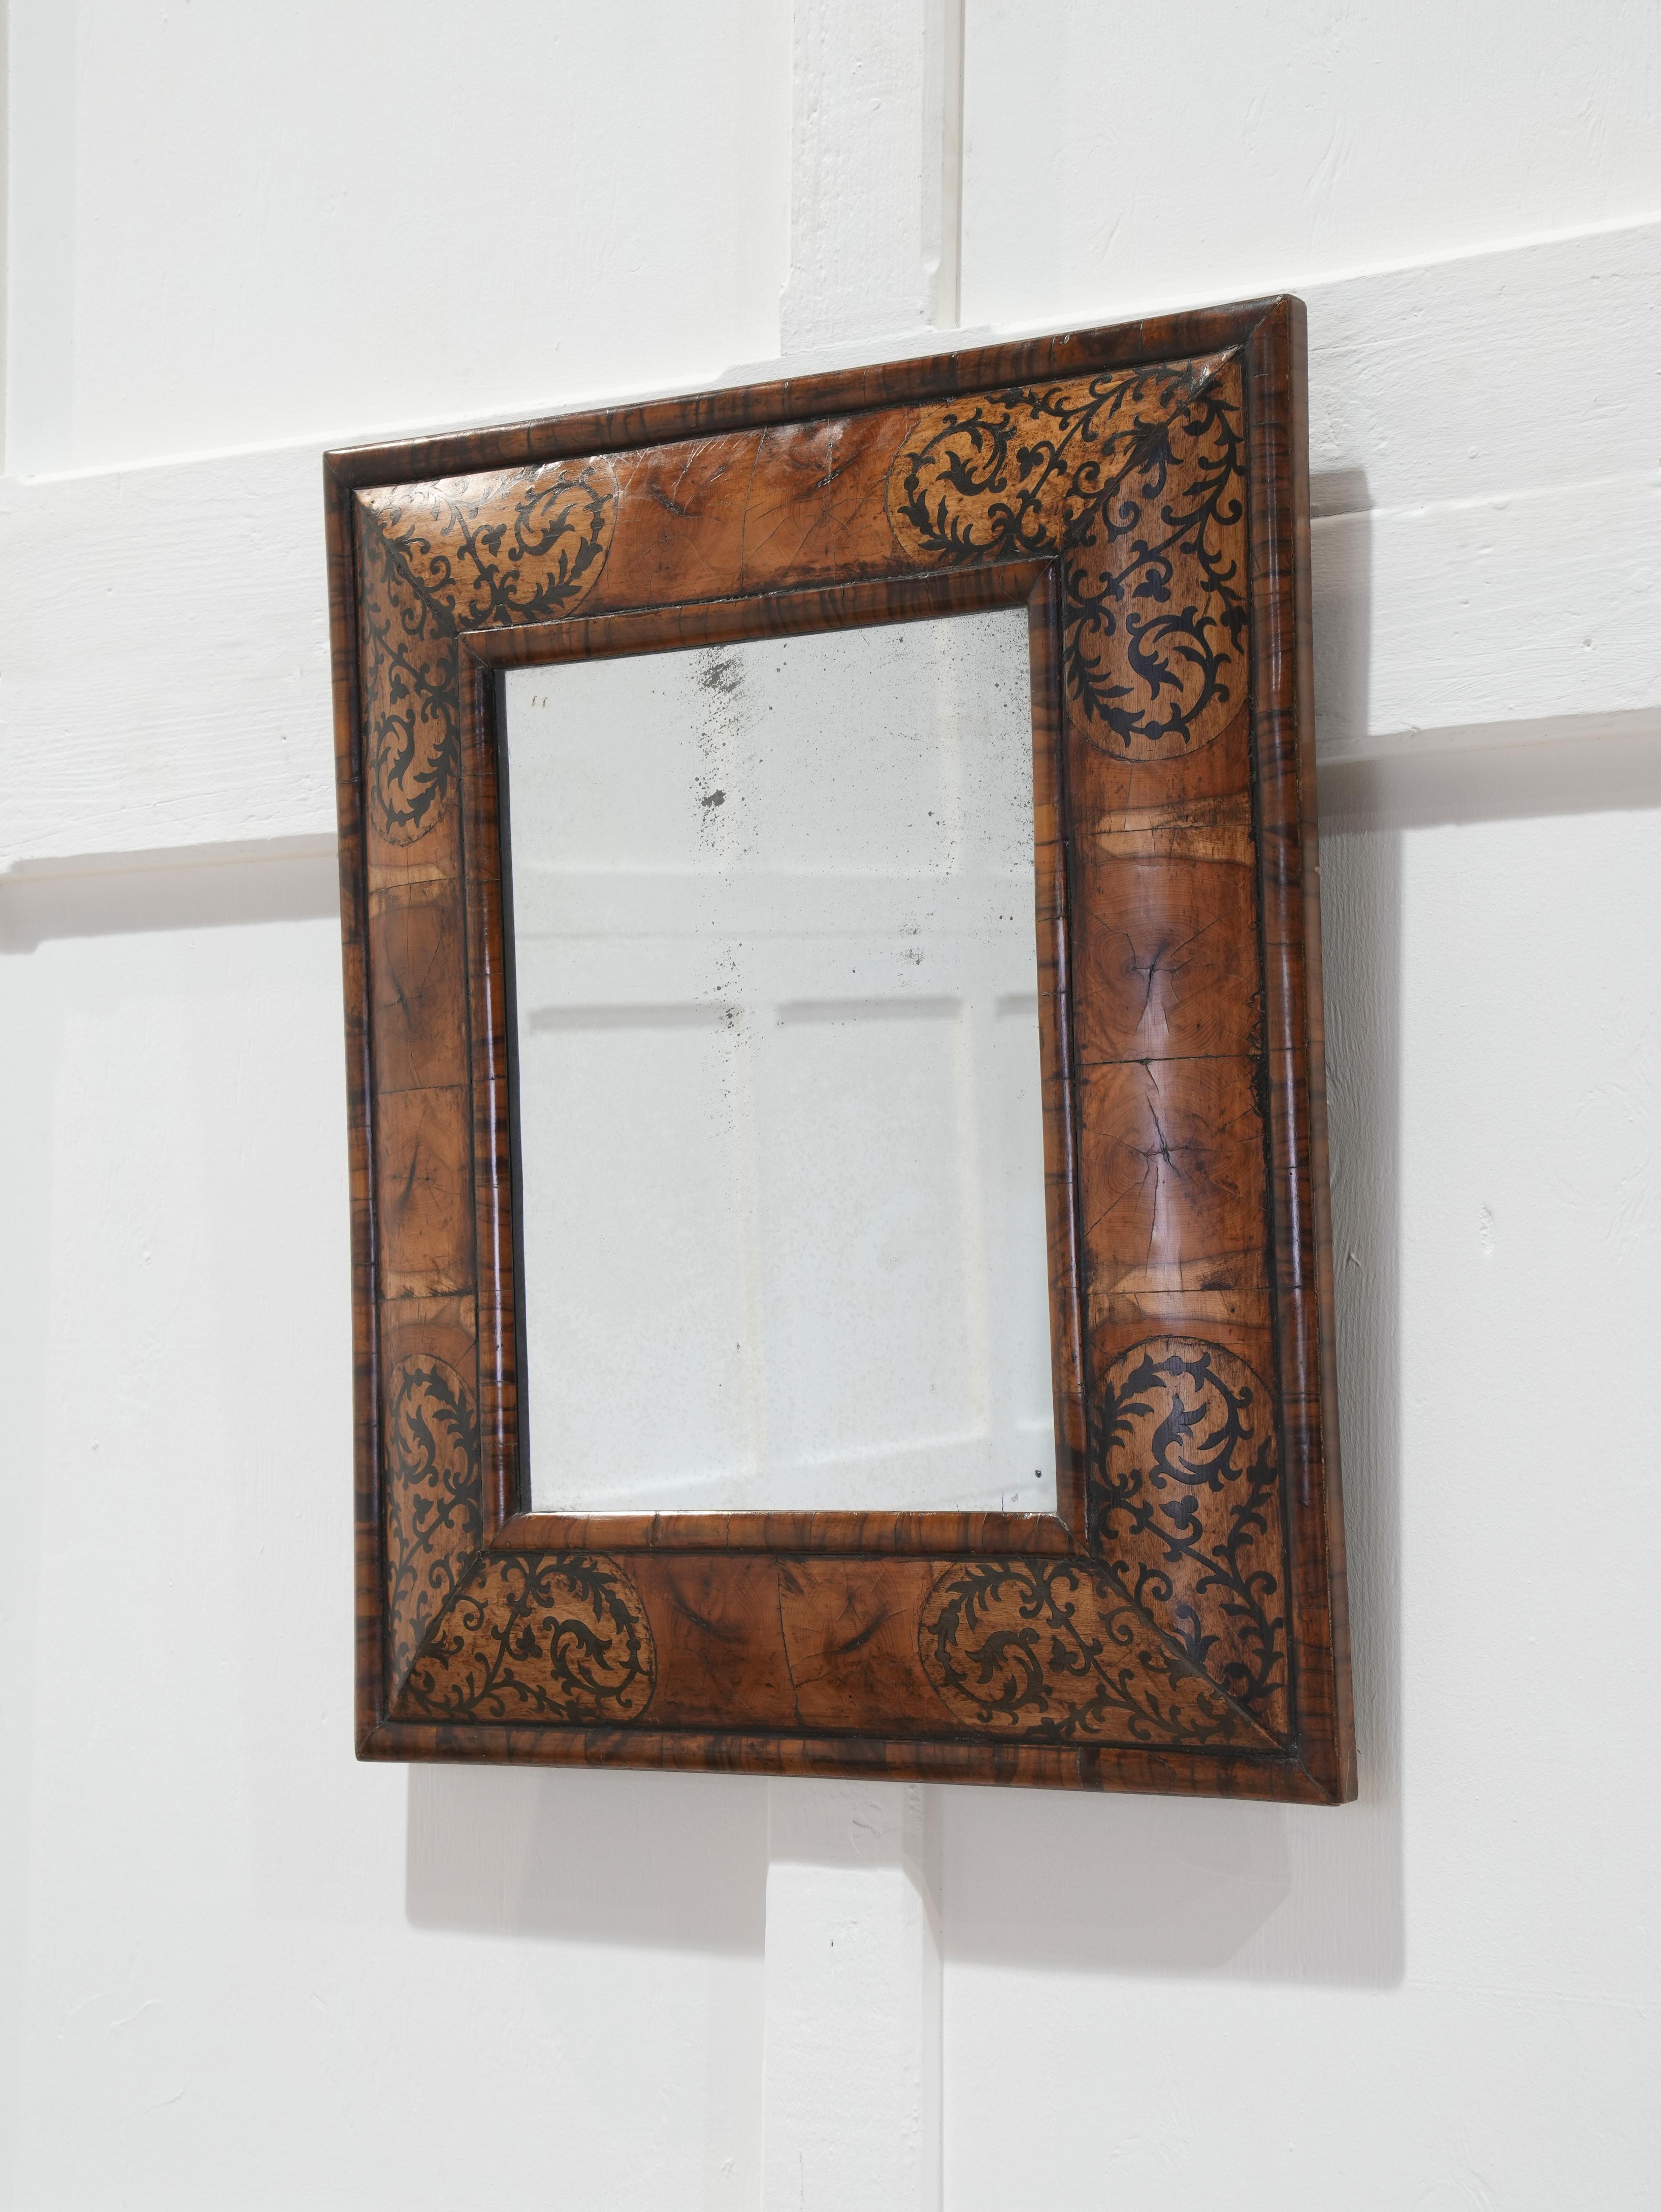 The frame veneered with individually end cut yew block with walnut borders and ebony inlay, lightly foxed mirror plate,

circa 1690-1700.